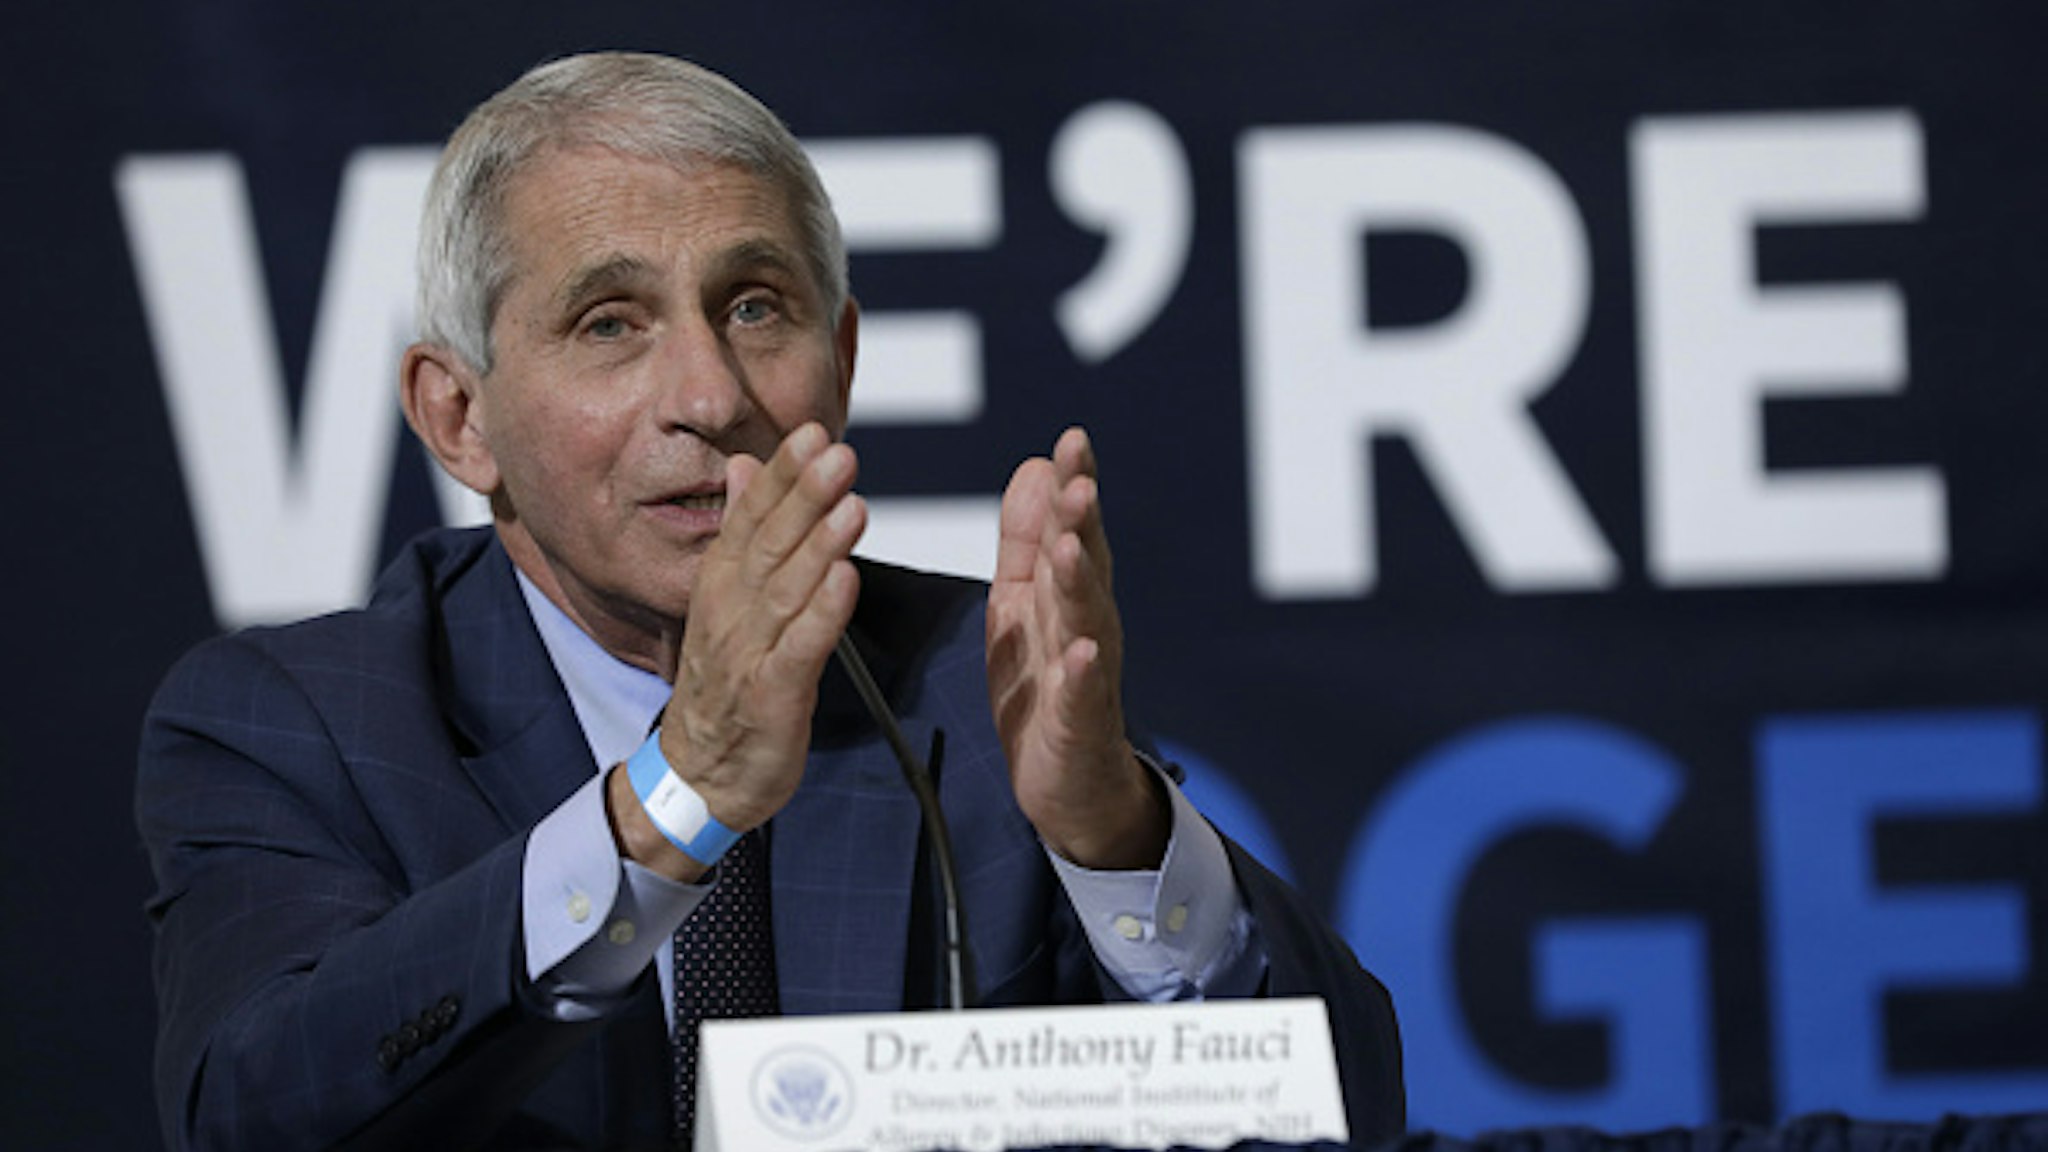 Anthony Fauci, director of the National Institute of Allergy and Infectious Diseases, speaks during a roundtable discussion at the American Red Cross National Headquarters in Washington, D.C., U.S., on Thursday, July 30, 2020. Trump is coming under increased pressure to impose national rules as the U.S., already with the worlds highest coronavirus death toll, struggles to contain the spread of the coronavirus.